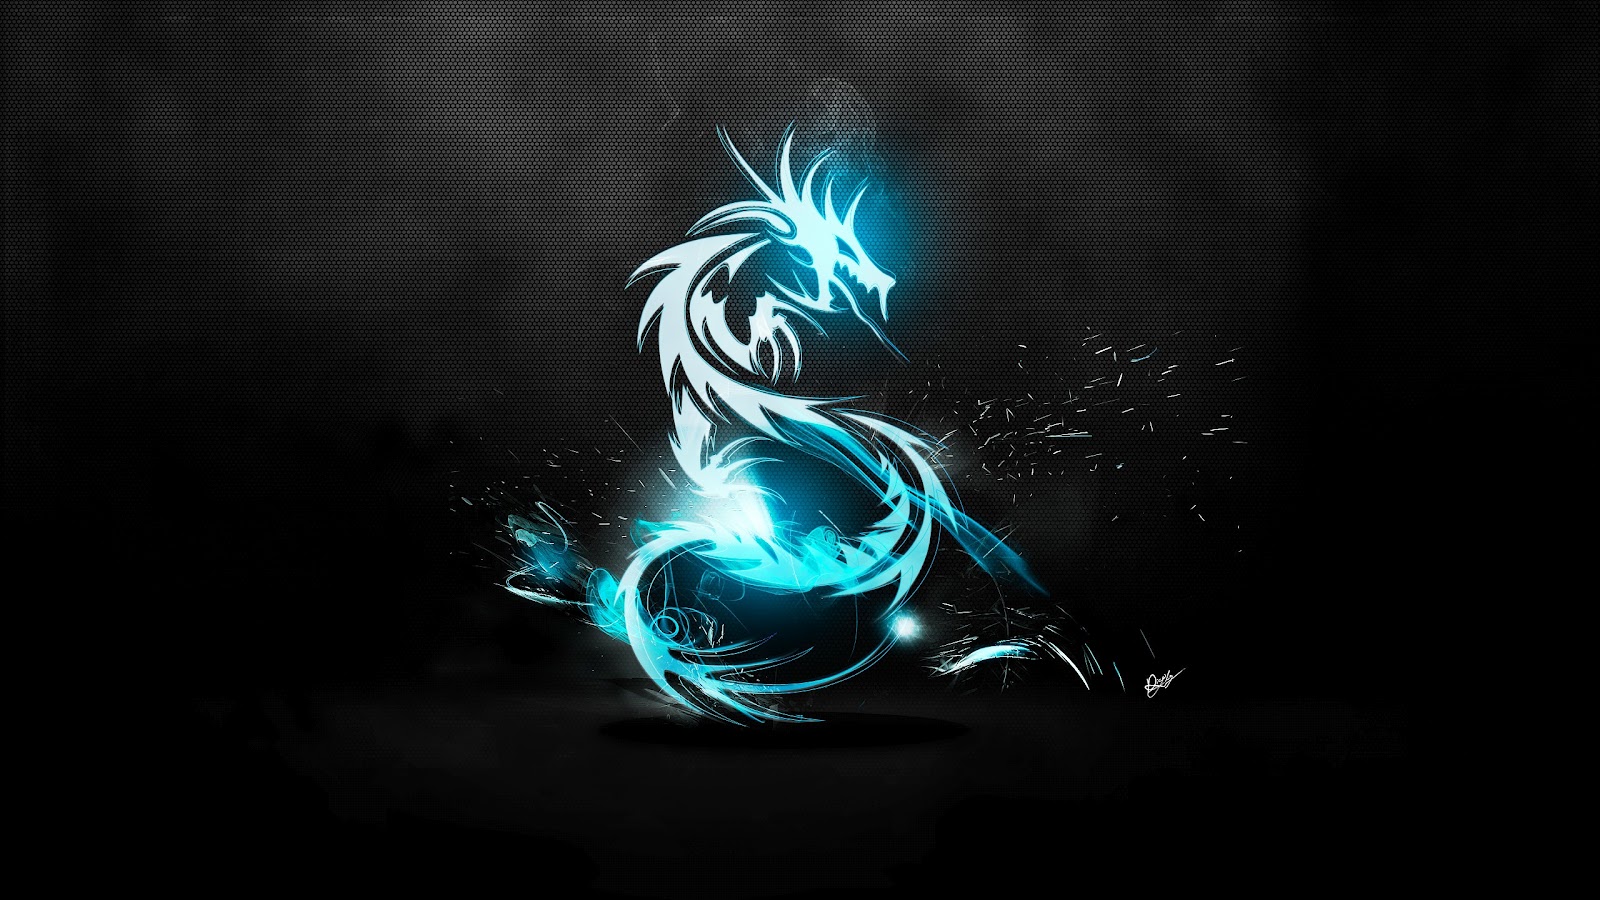 UDAS POET POETRY: Neon Wallpaper for Android Neon Dragon Wallpaper